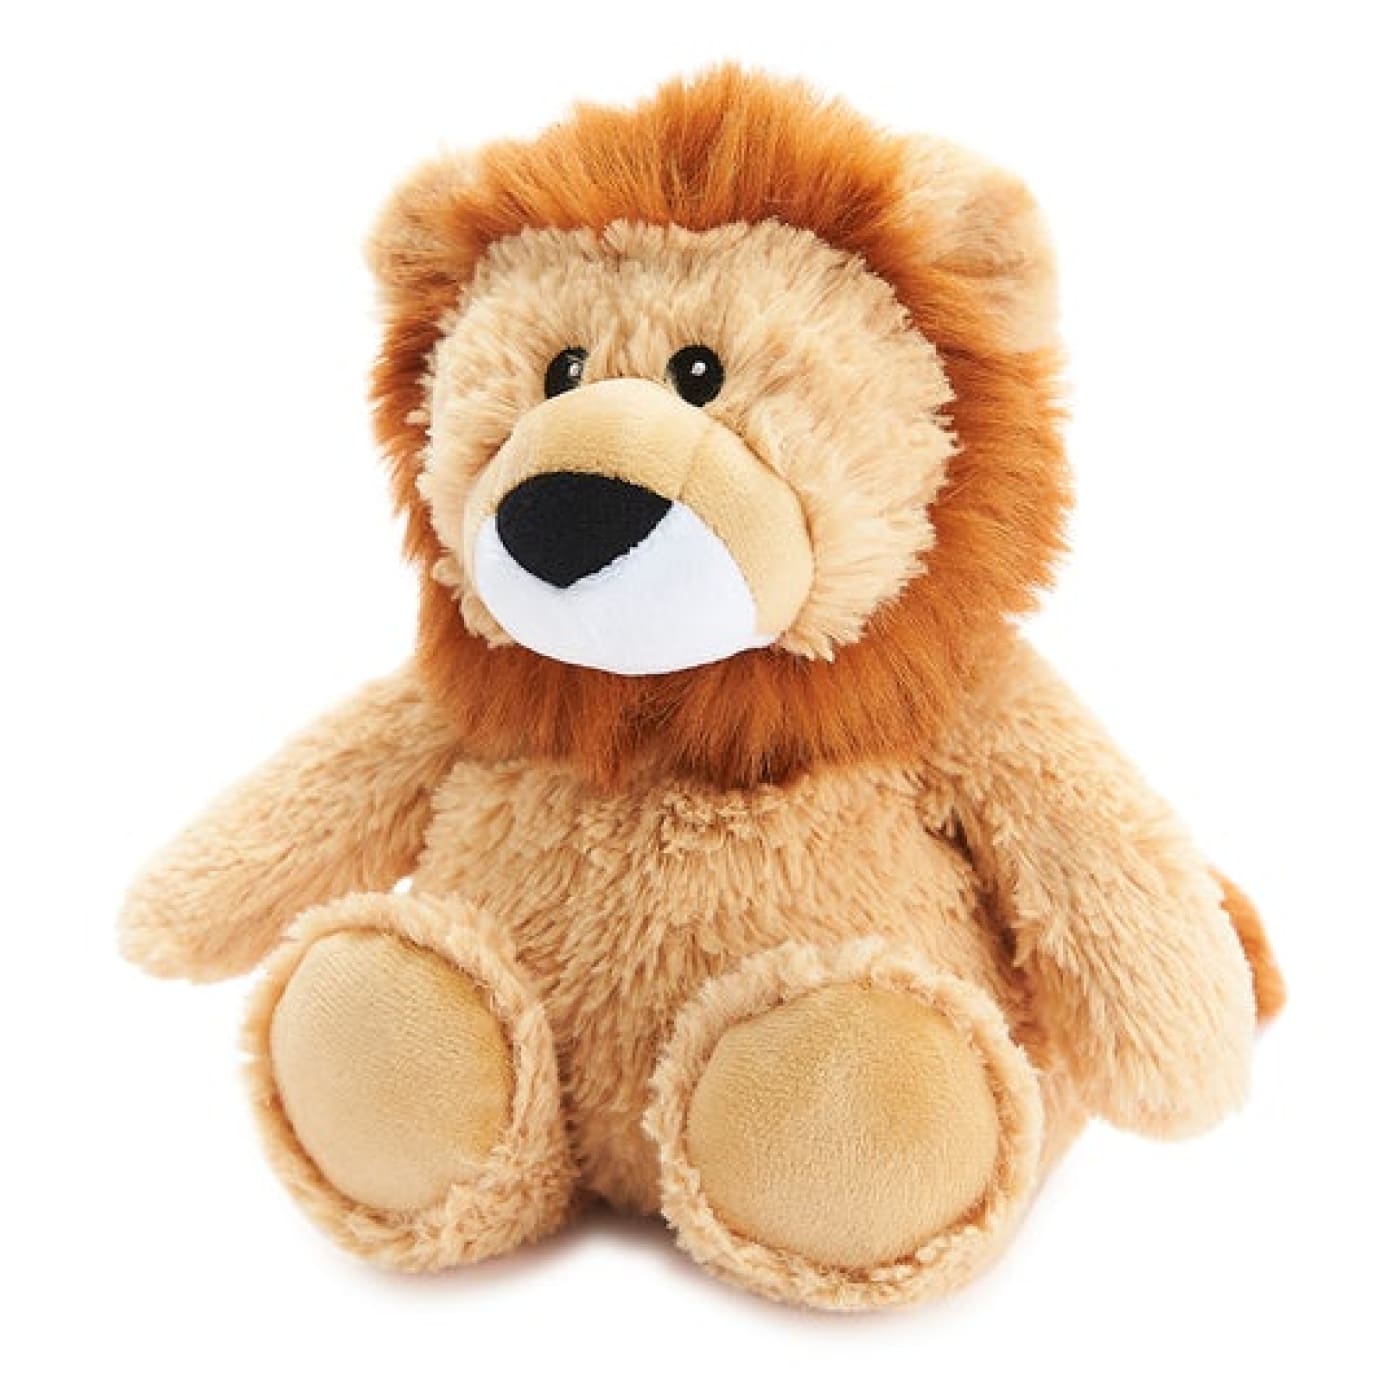 Warmies Cozy Plush - Leo Lion - Lion - HEALTH & HOME SAFETY - THERMOMETERS/MEDICINAL